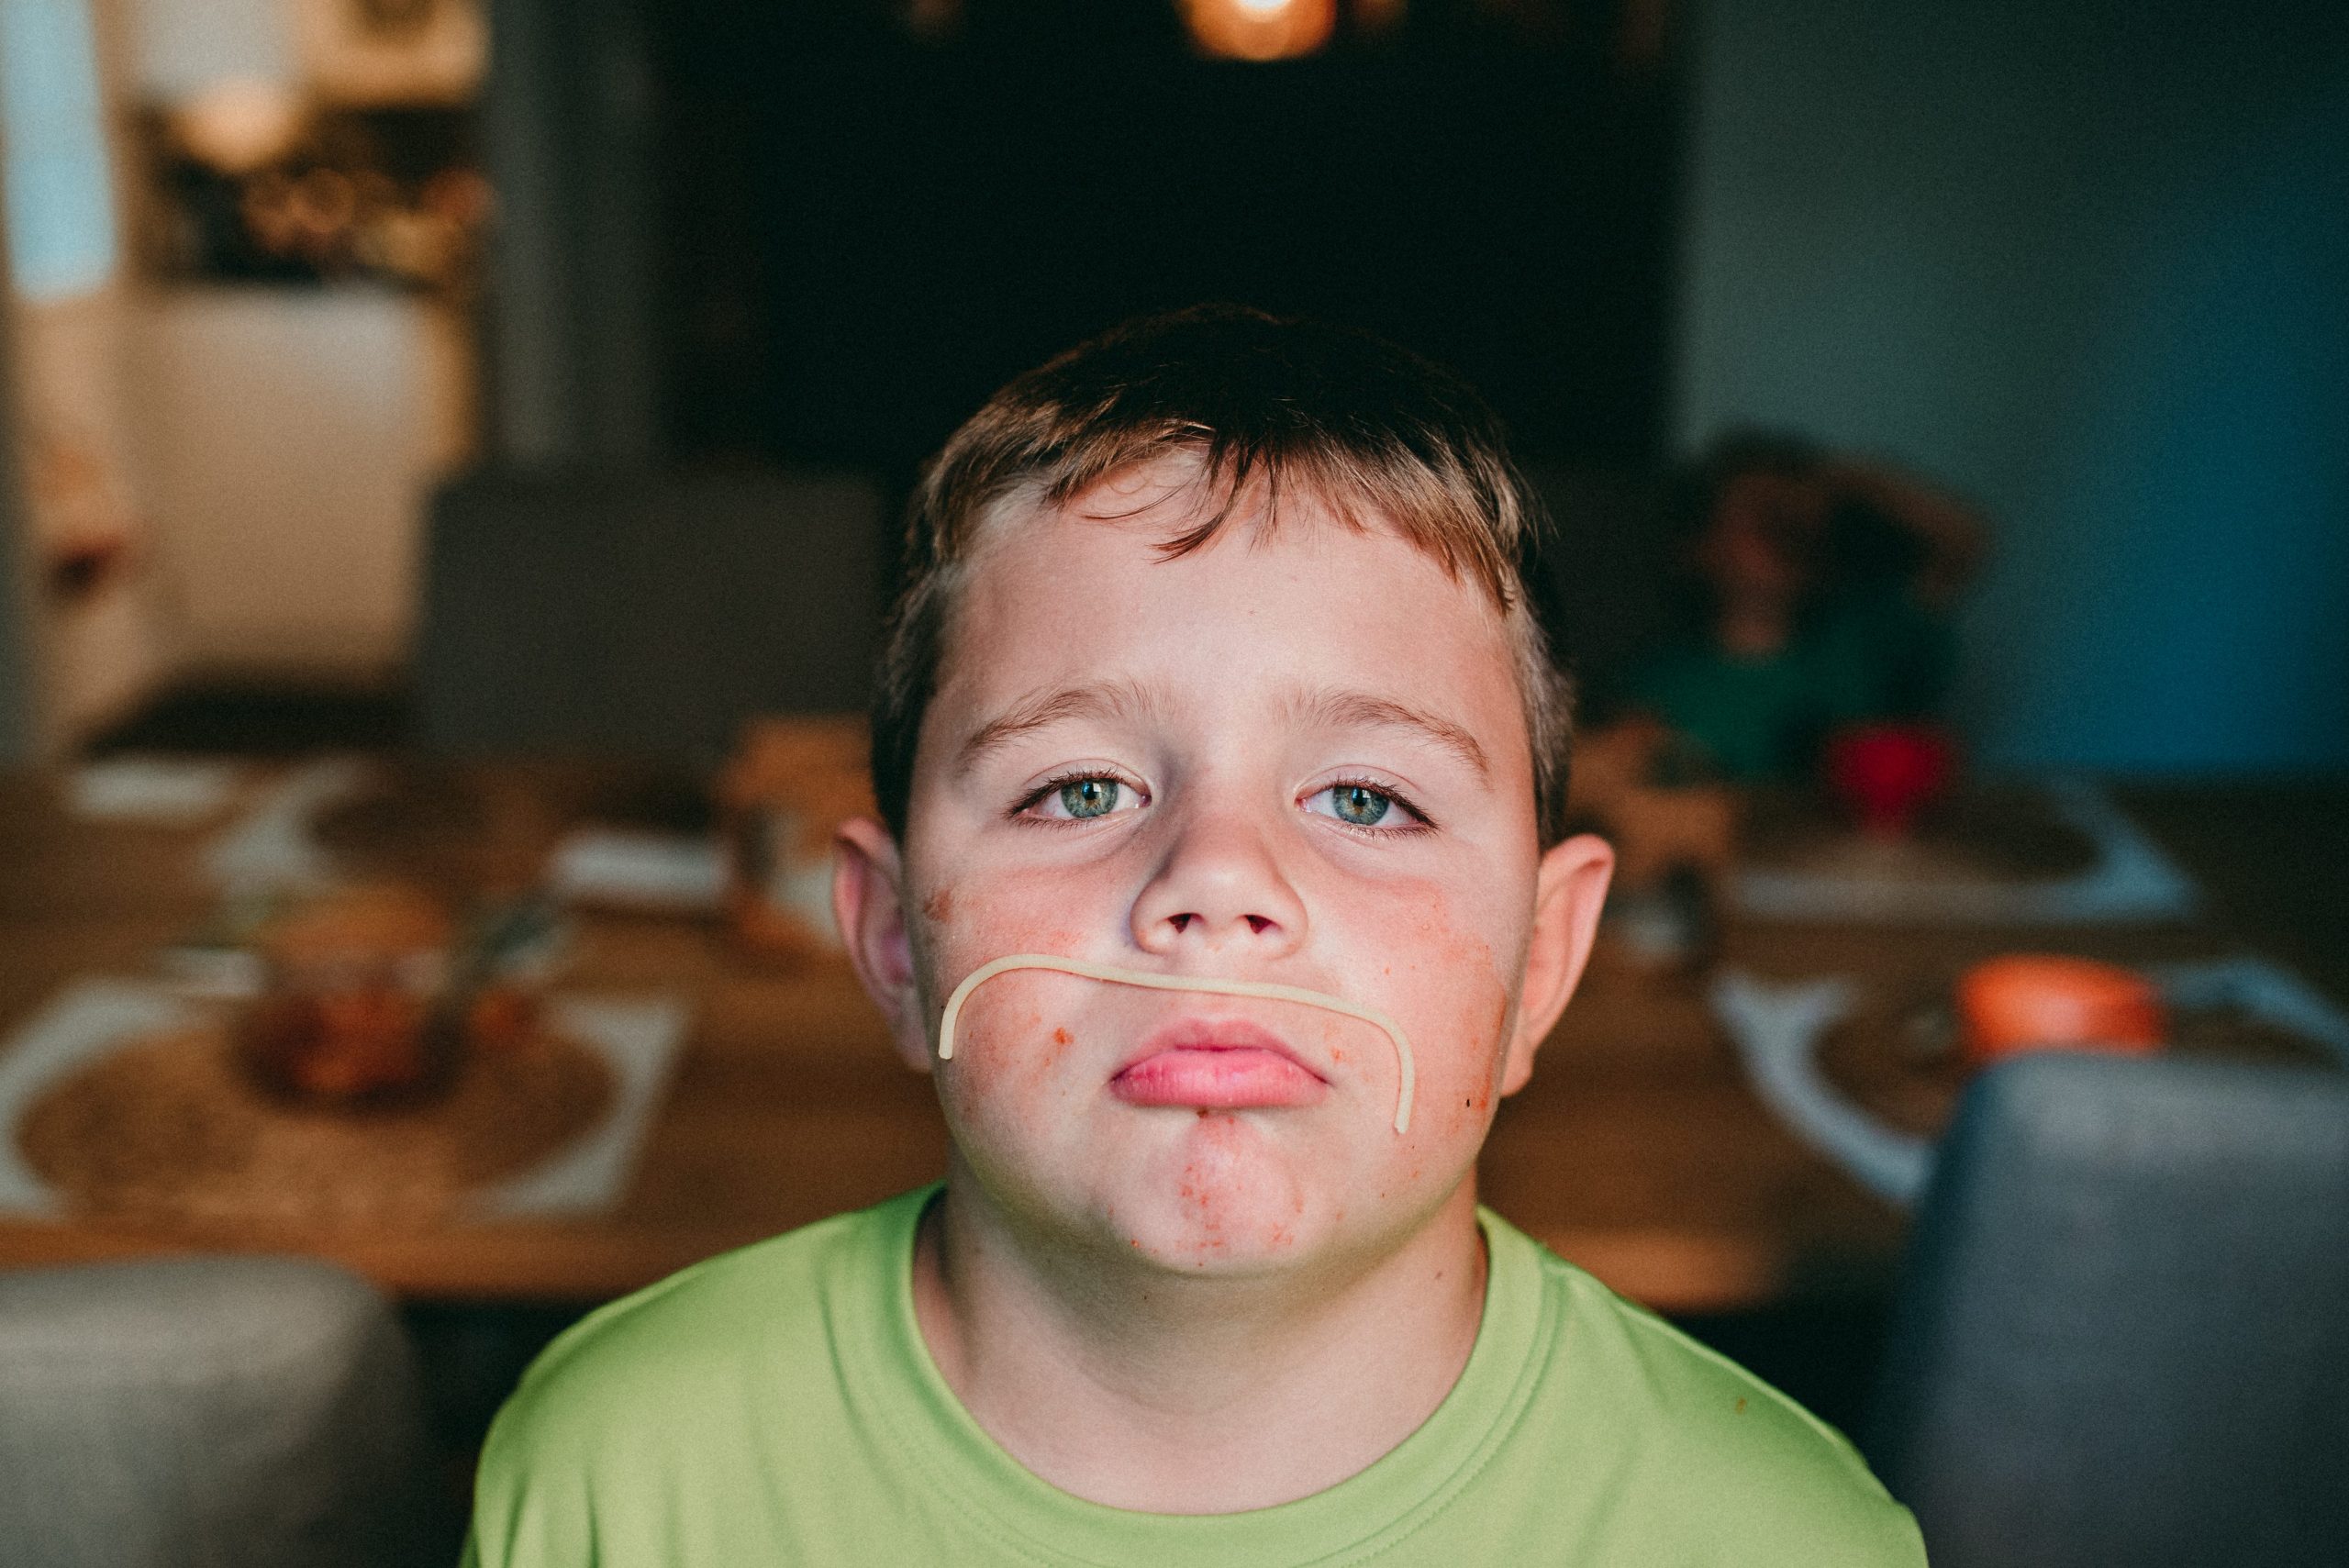 A young boy, lit by window light, poses with a spaghetti noodle mustache.